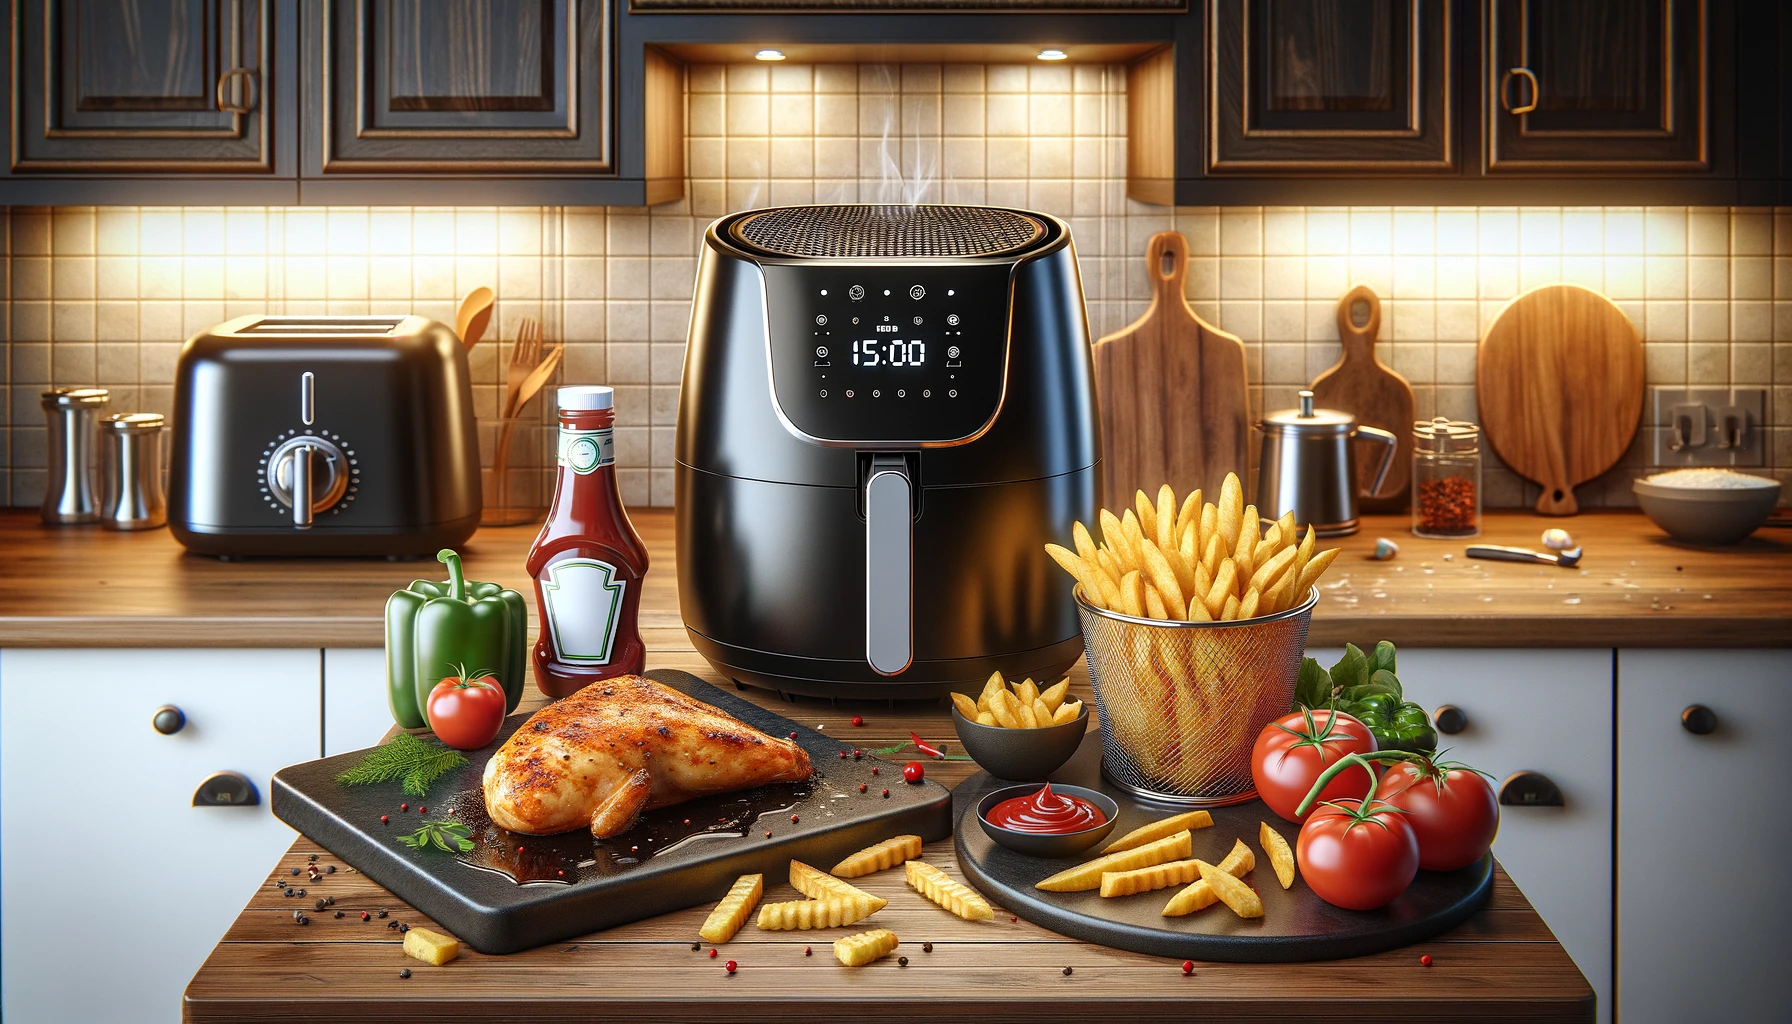 What to do with that Air Fryer